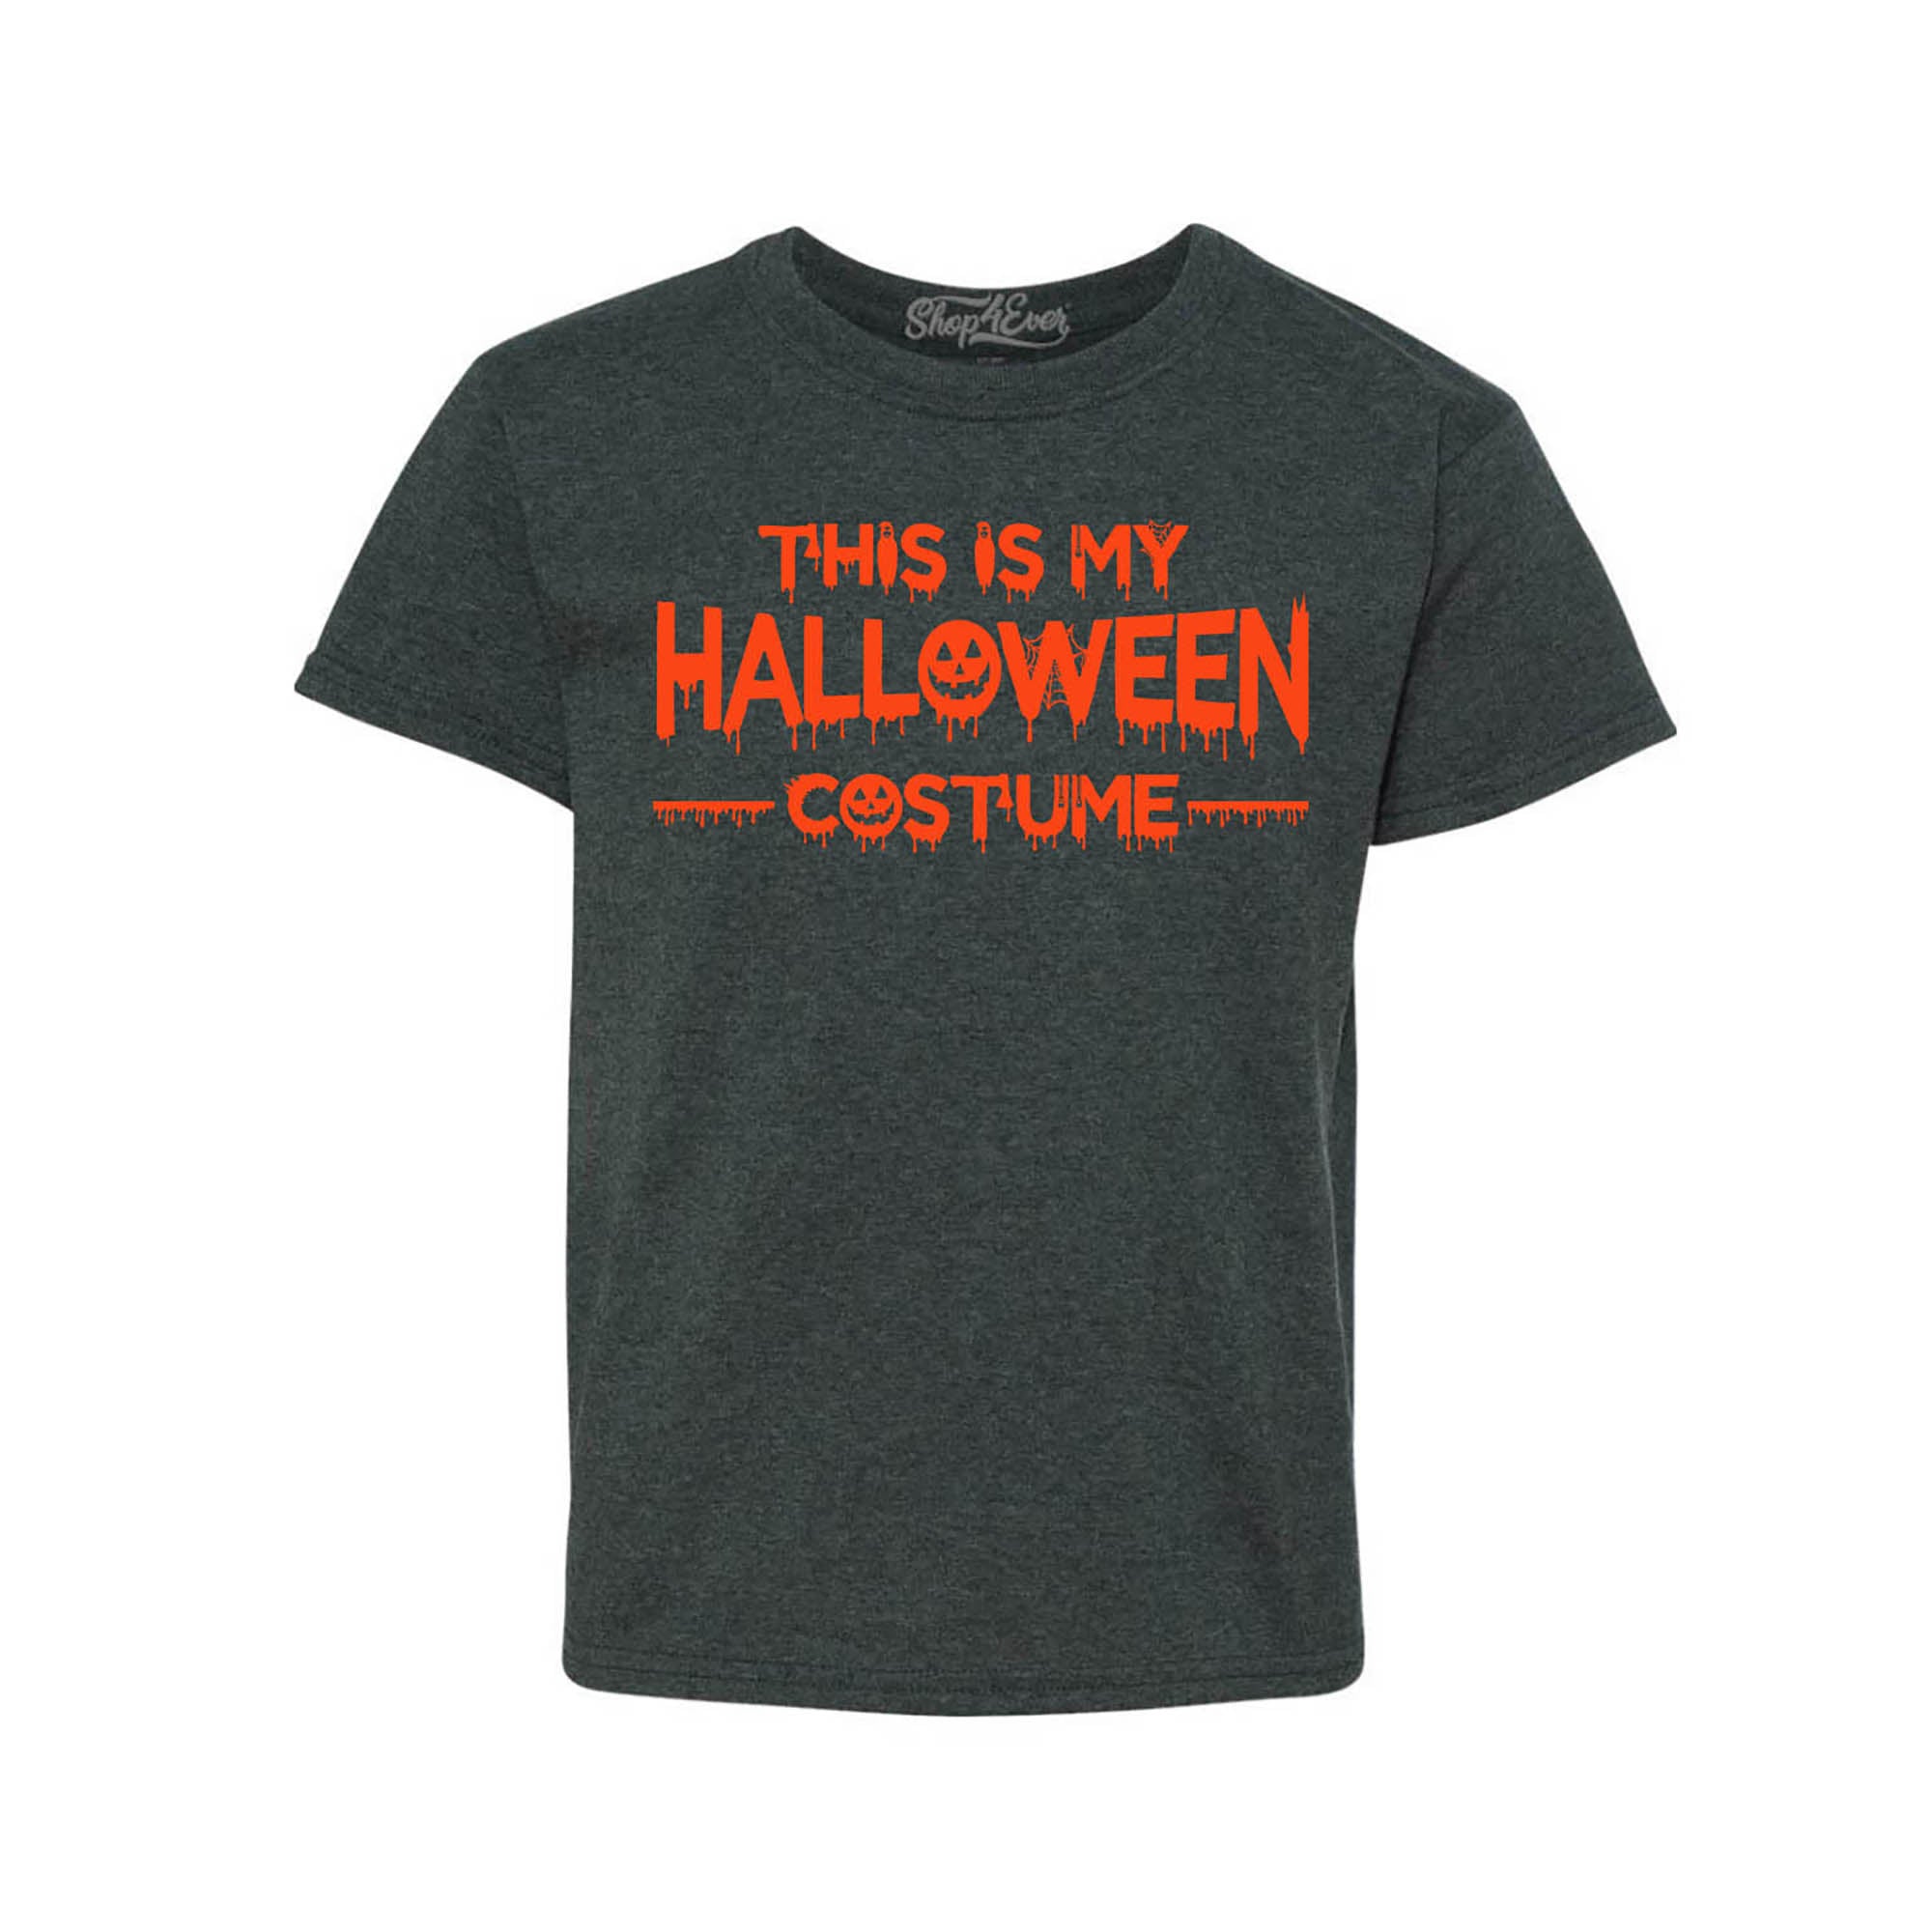 This is My Halloween Costume Youth's T-Shirt